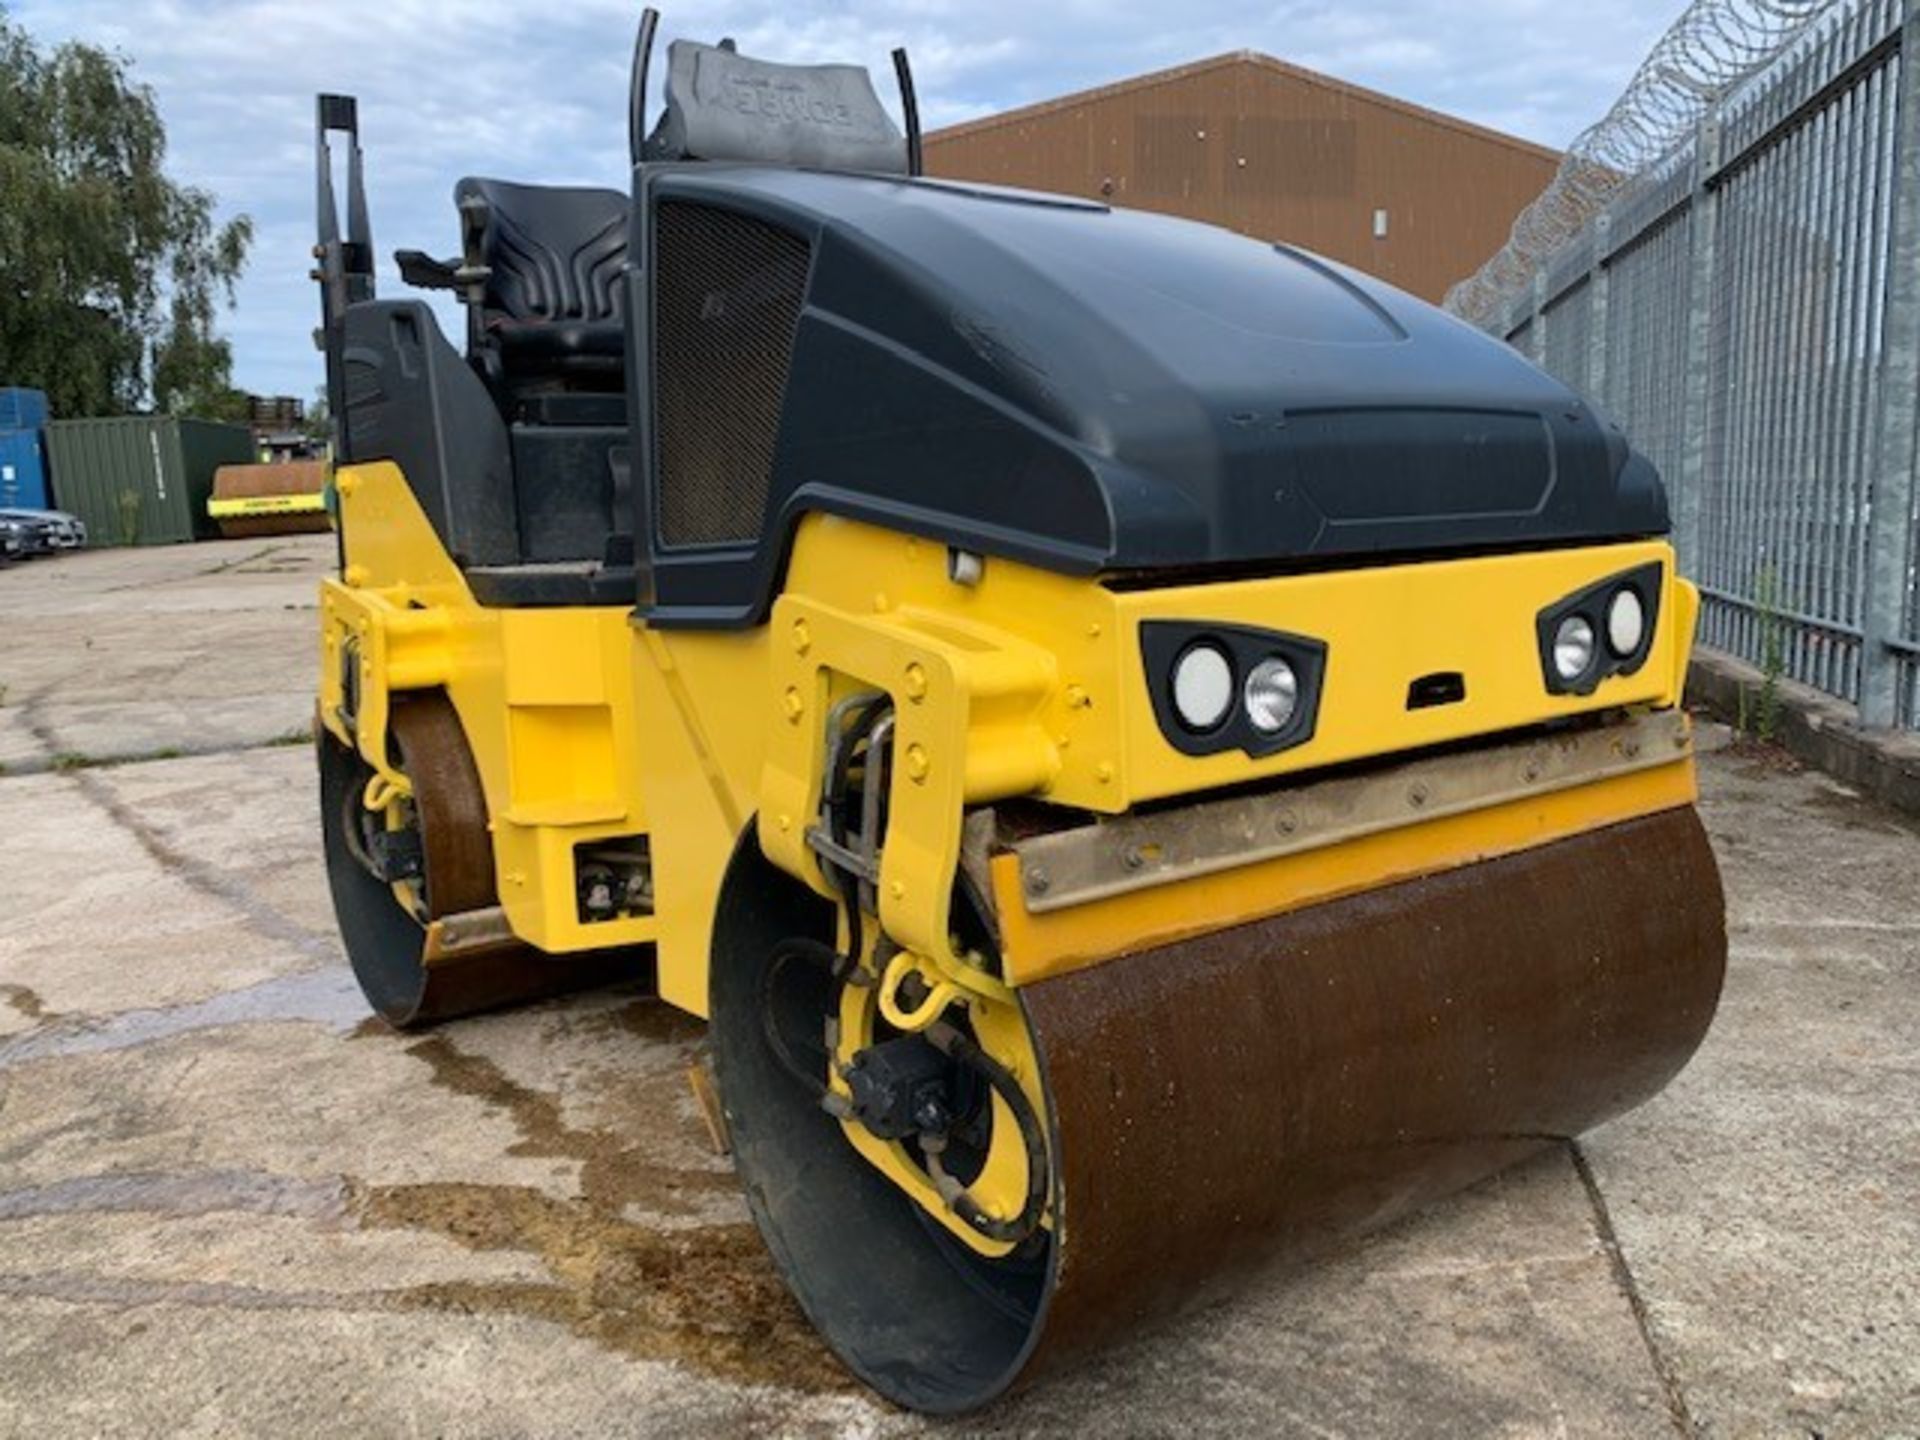 BOMAG 120 AD-5 TWIN DRUM ROLLER, YEAR 2015. 886 REC HOURS. WHEN TESTED WAS SEEN TO DRIVE, STEER AND